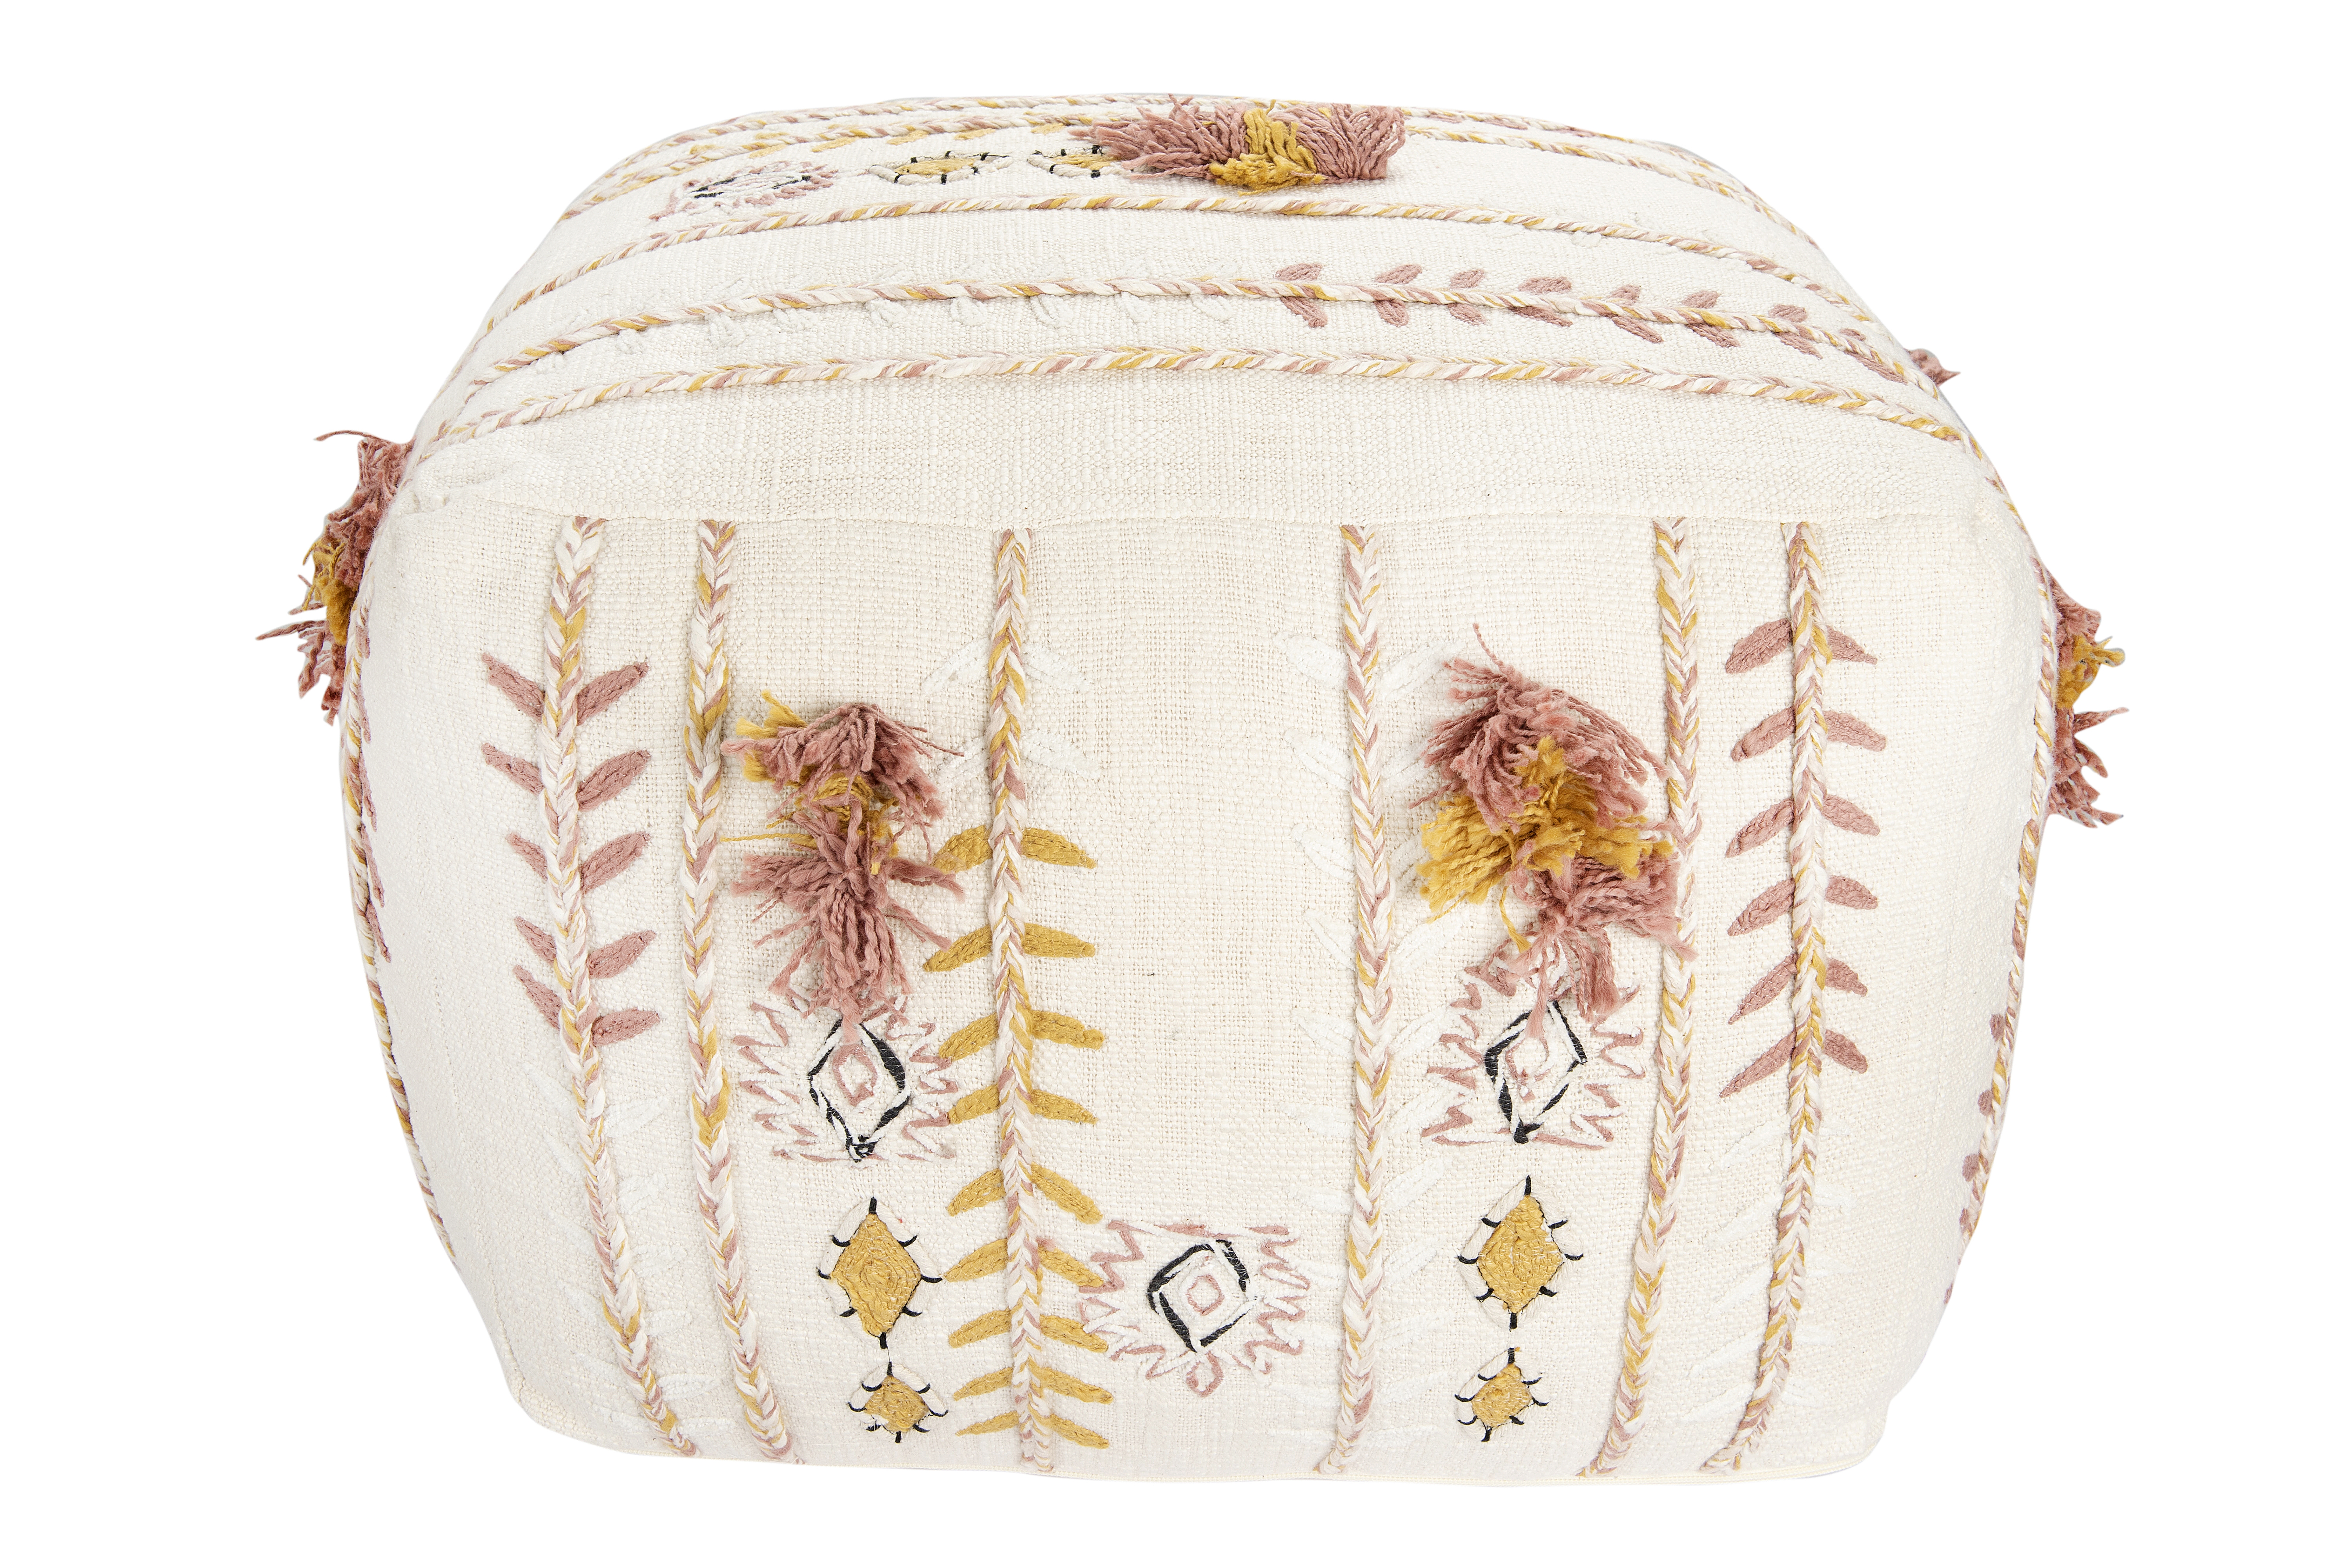 Square Cream Cotton Pouf with Misty Rose & Mustard Yellow Embroidery and Pom Poms - Nomad Home